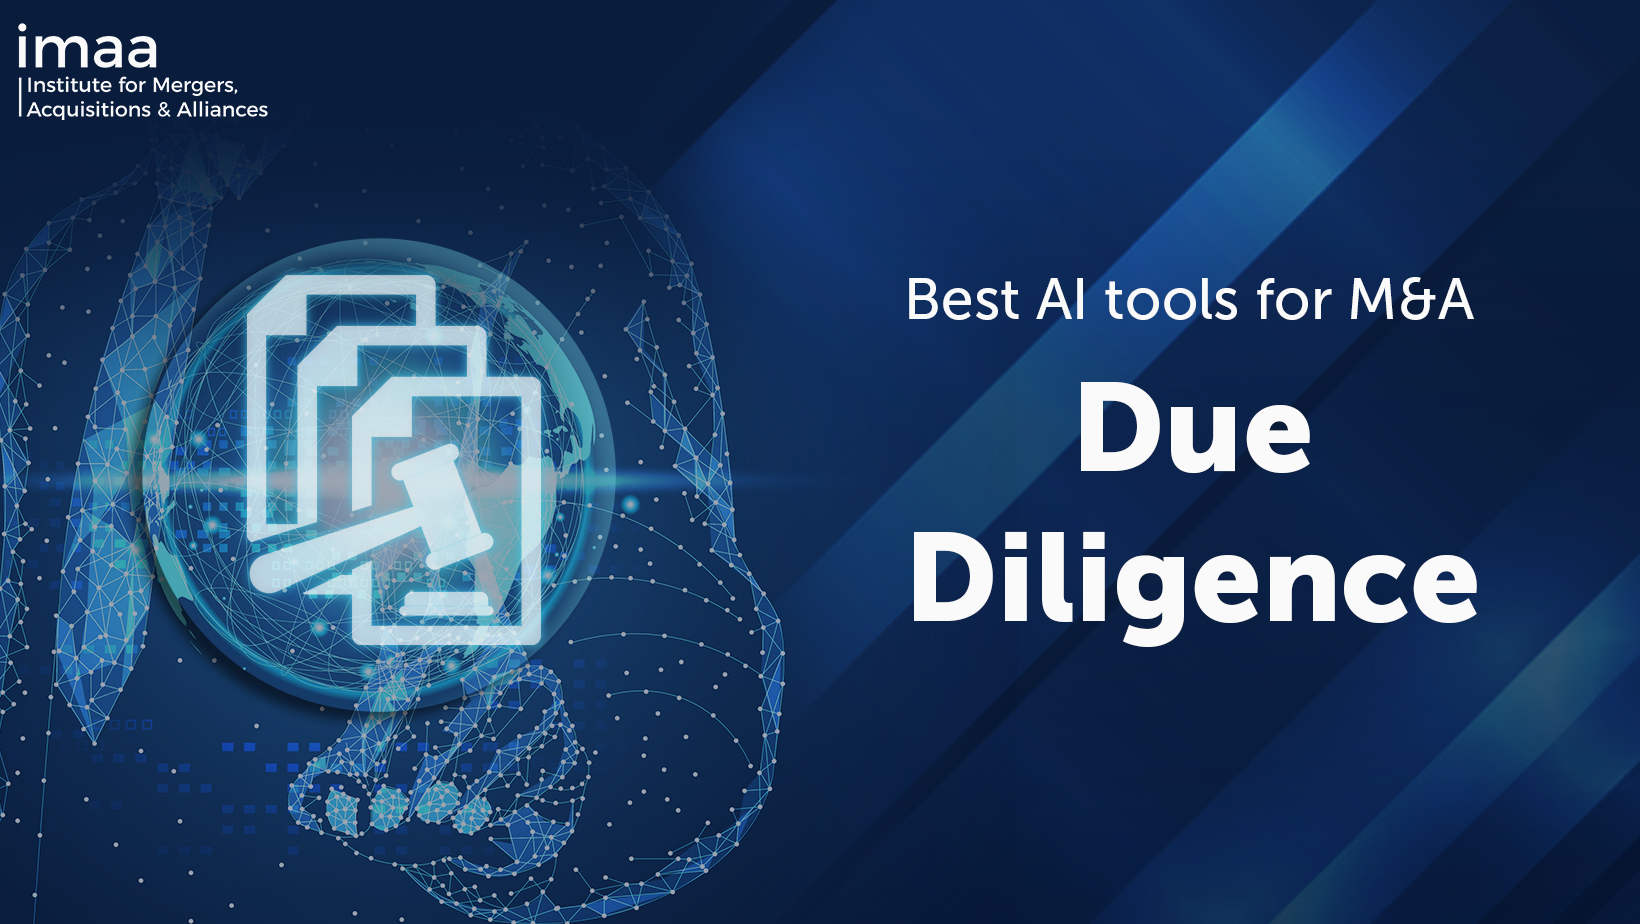 Best AI Tools for M&A Due Diligence